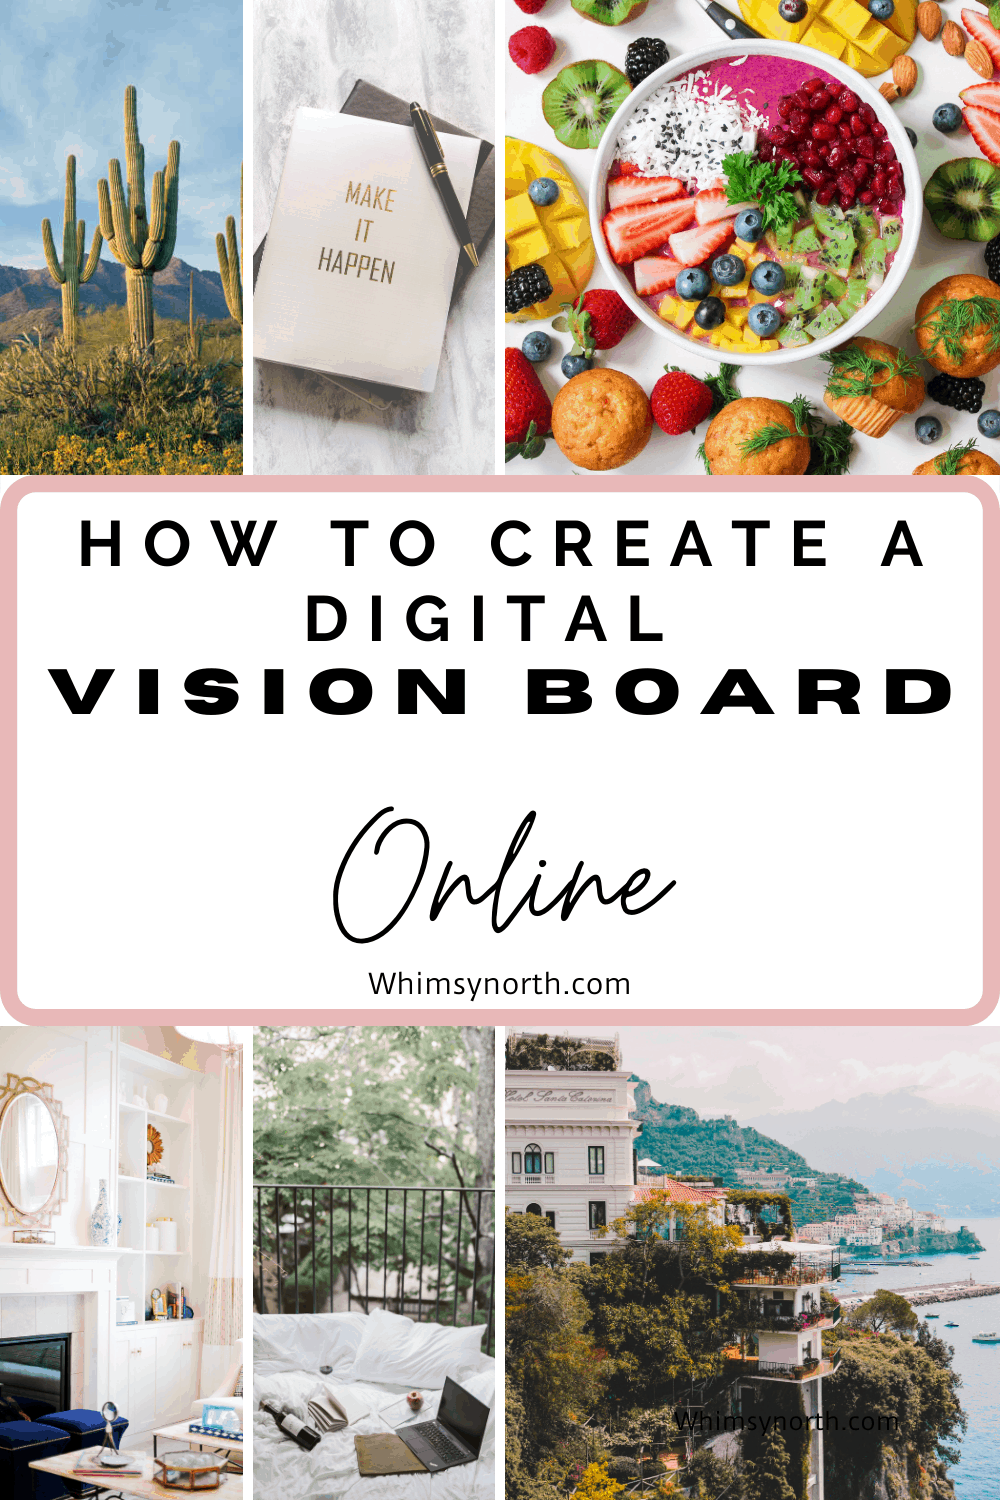 How to Create a Vision Board